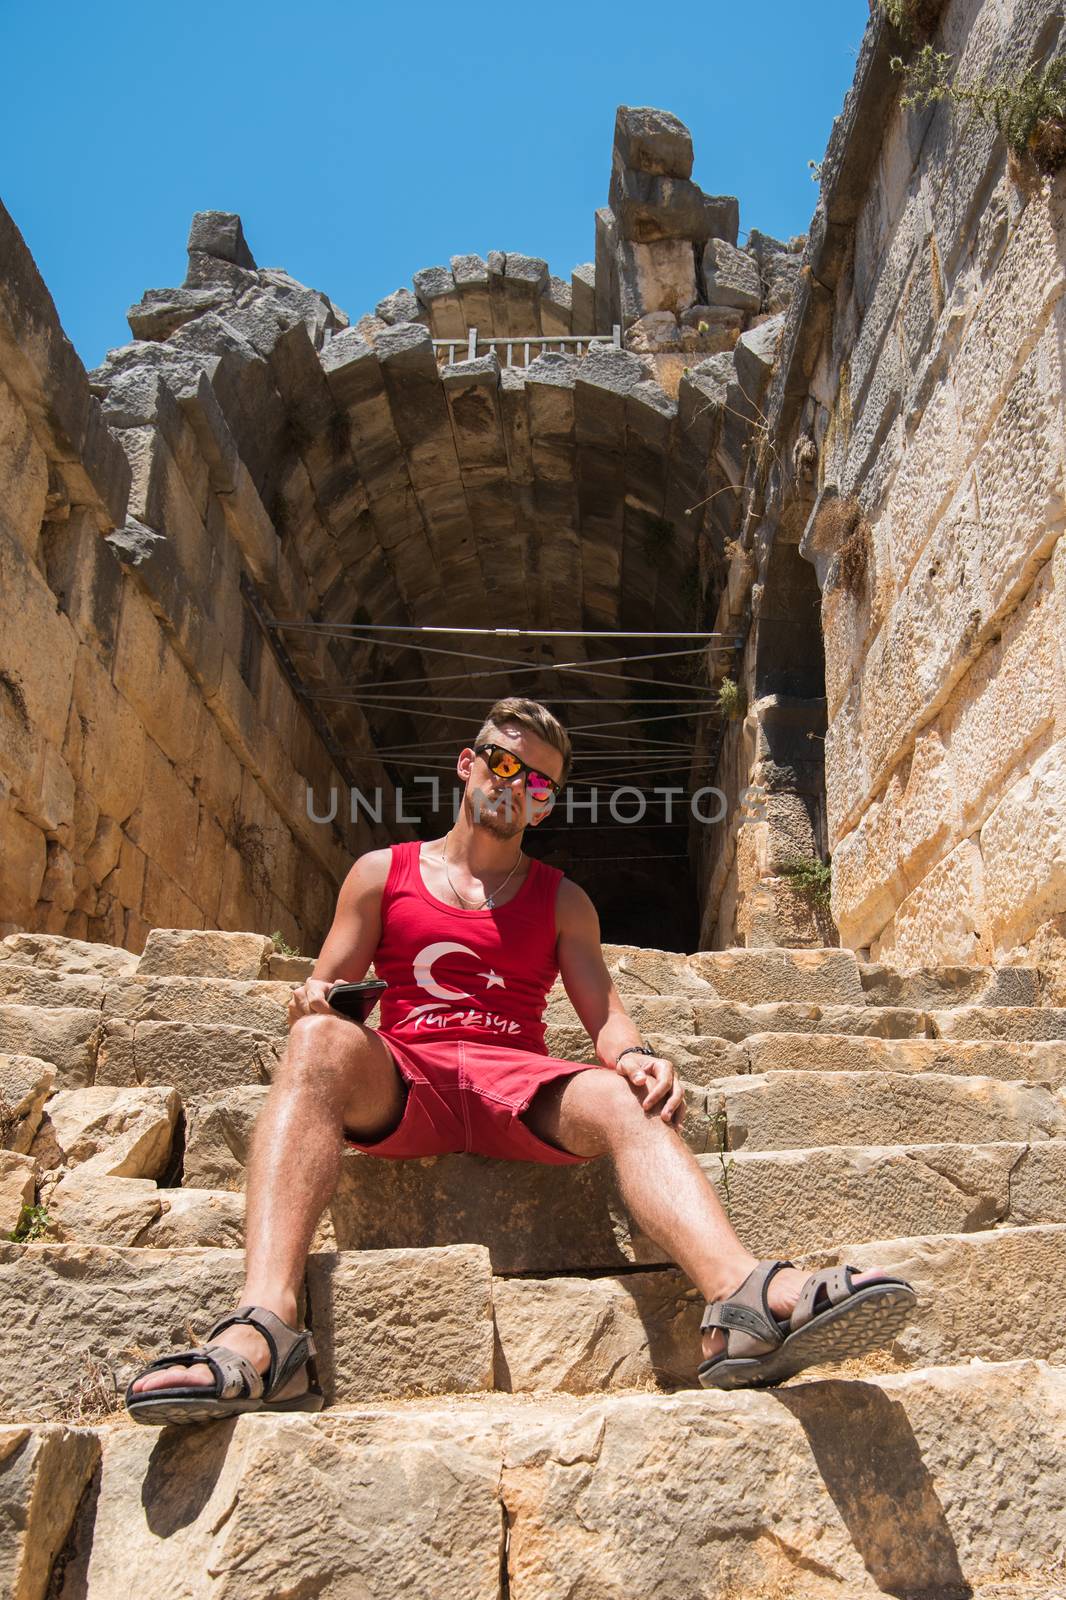 Young man at theatre in Myra ancient city of Antalya in Turkey.